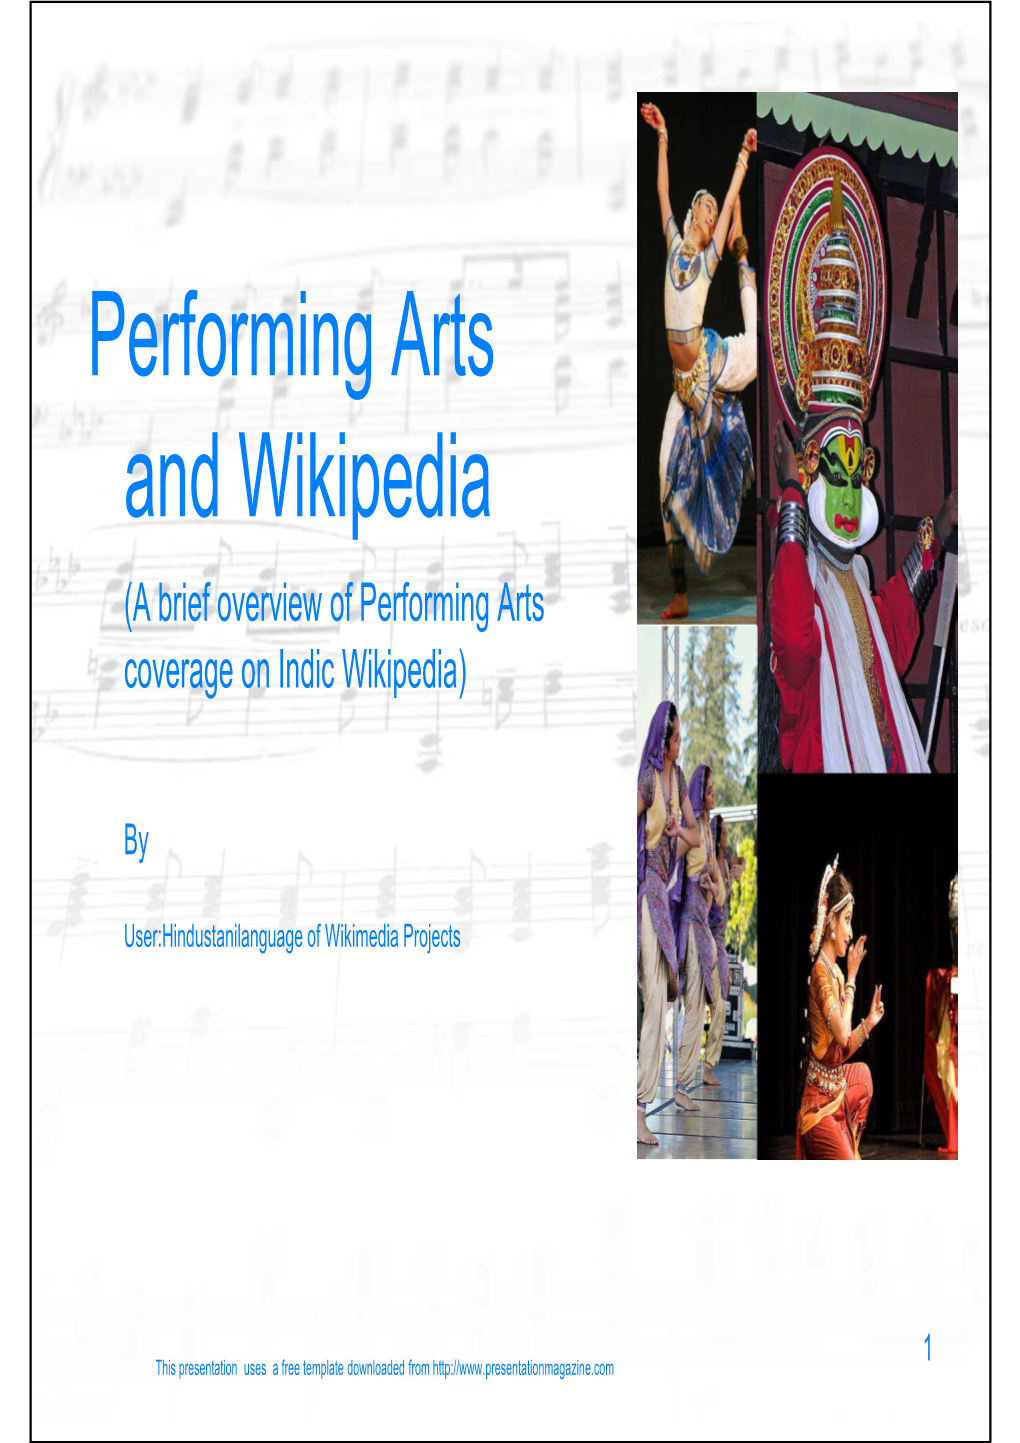 Performing Arts and Wikipedia (A Brief Overview of Performing Arts Coverage on Indic Wikipedia)